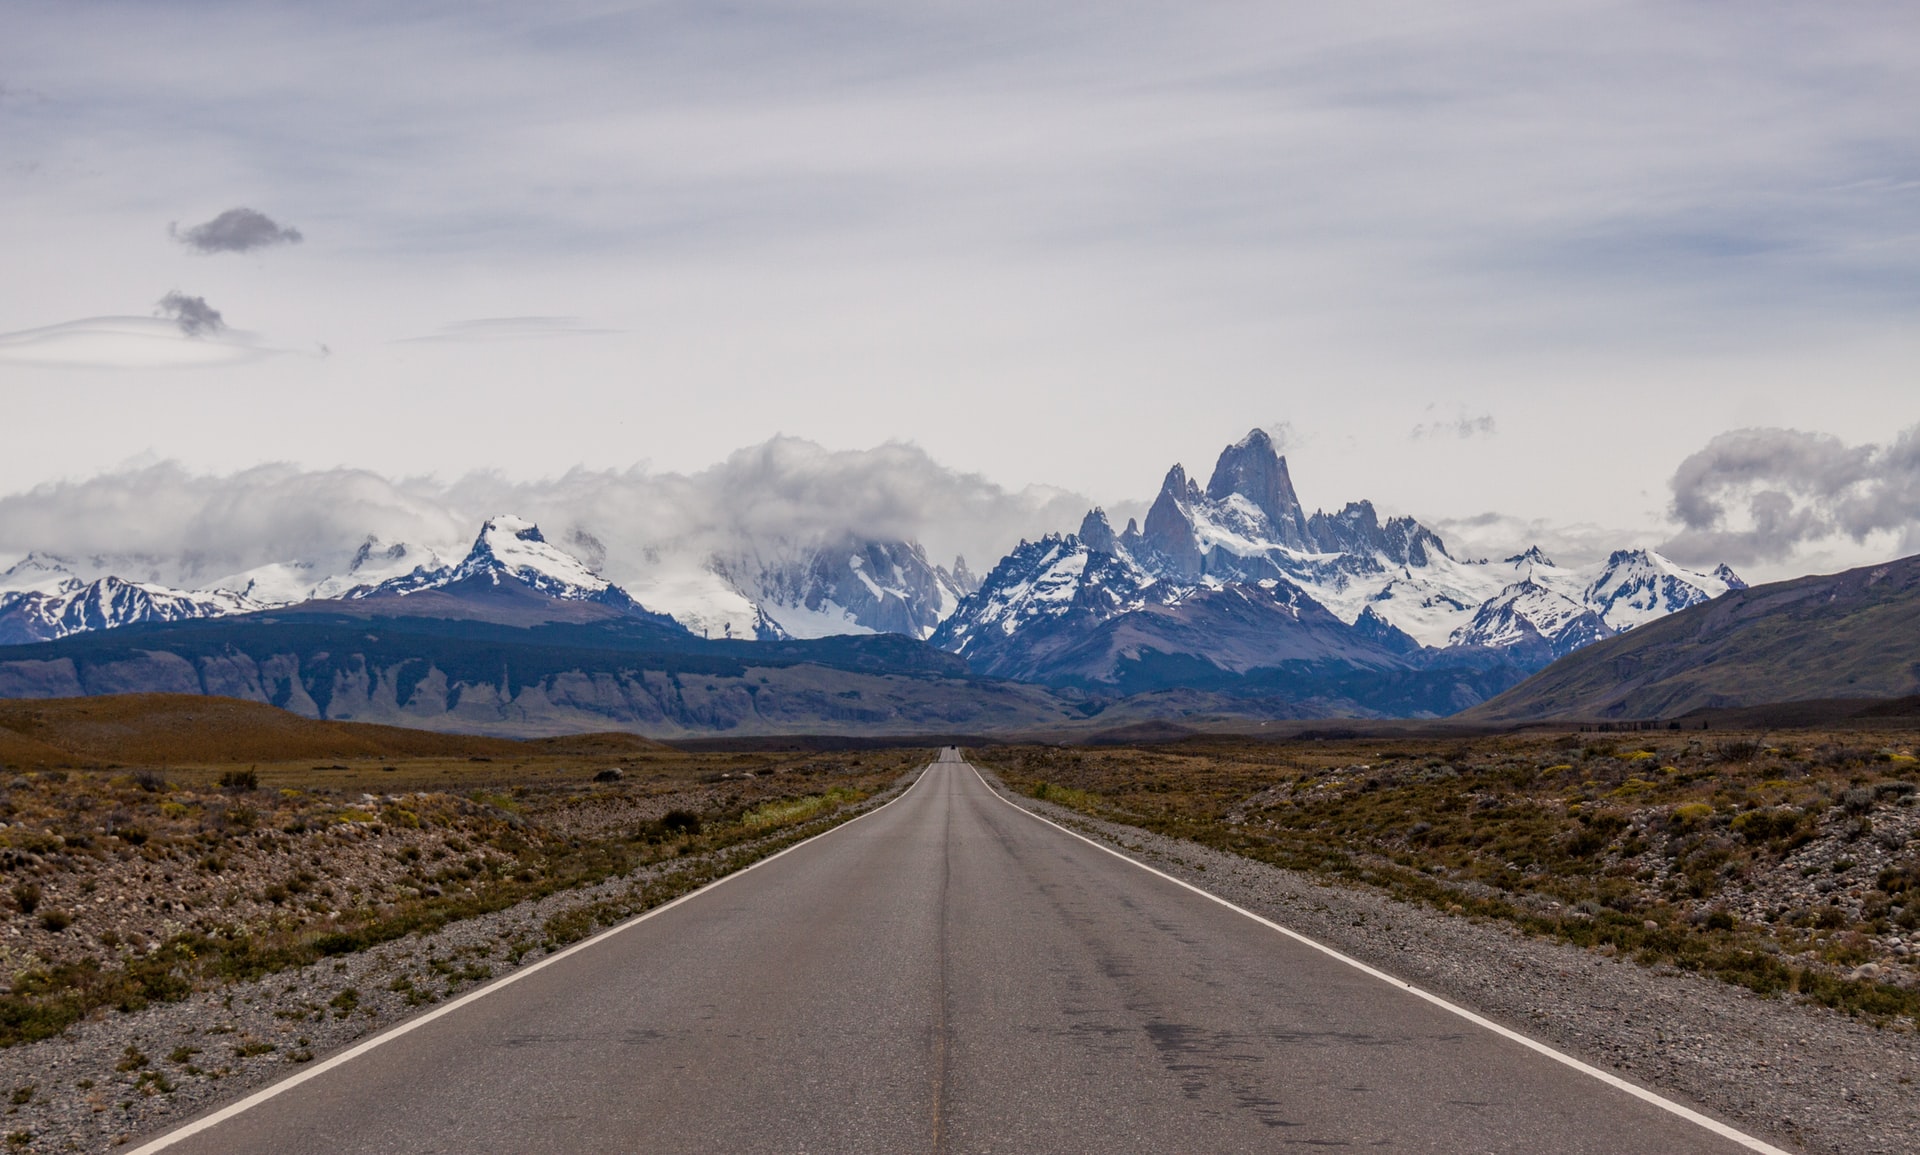 Picture showing a road and the Andes range mountains at the back.